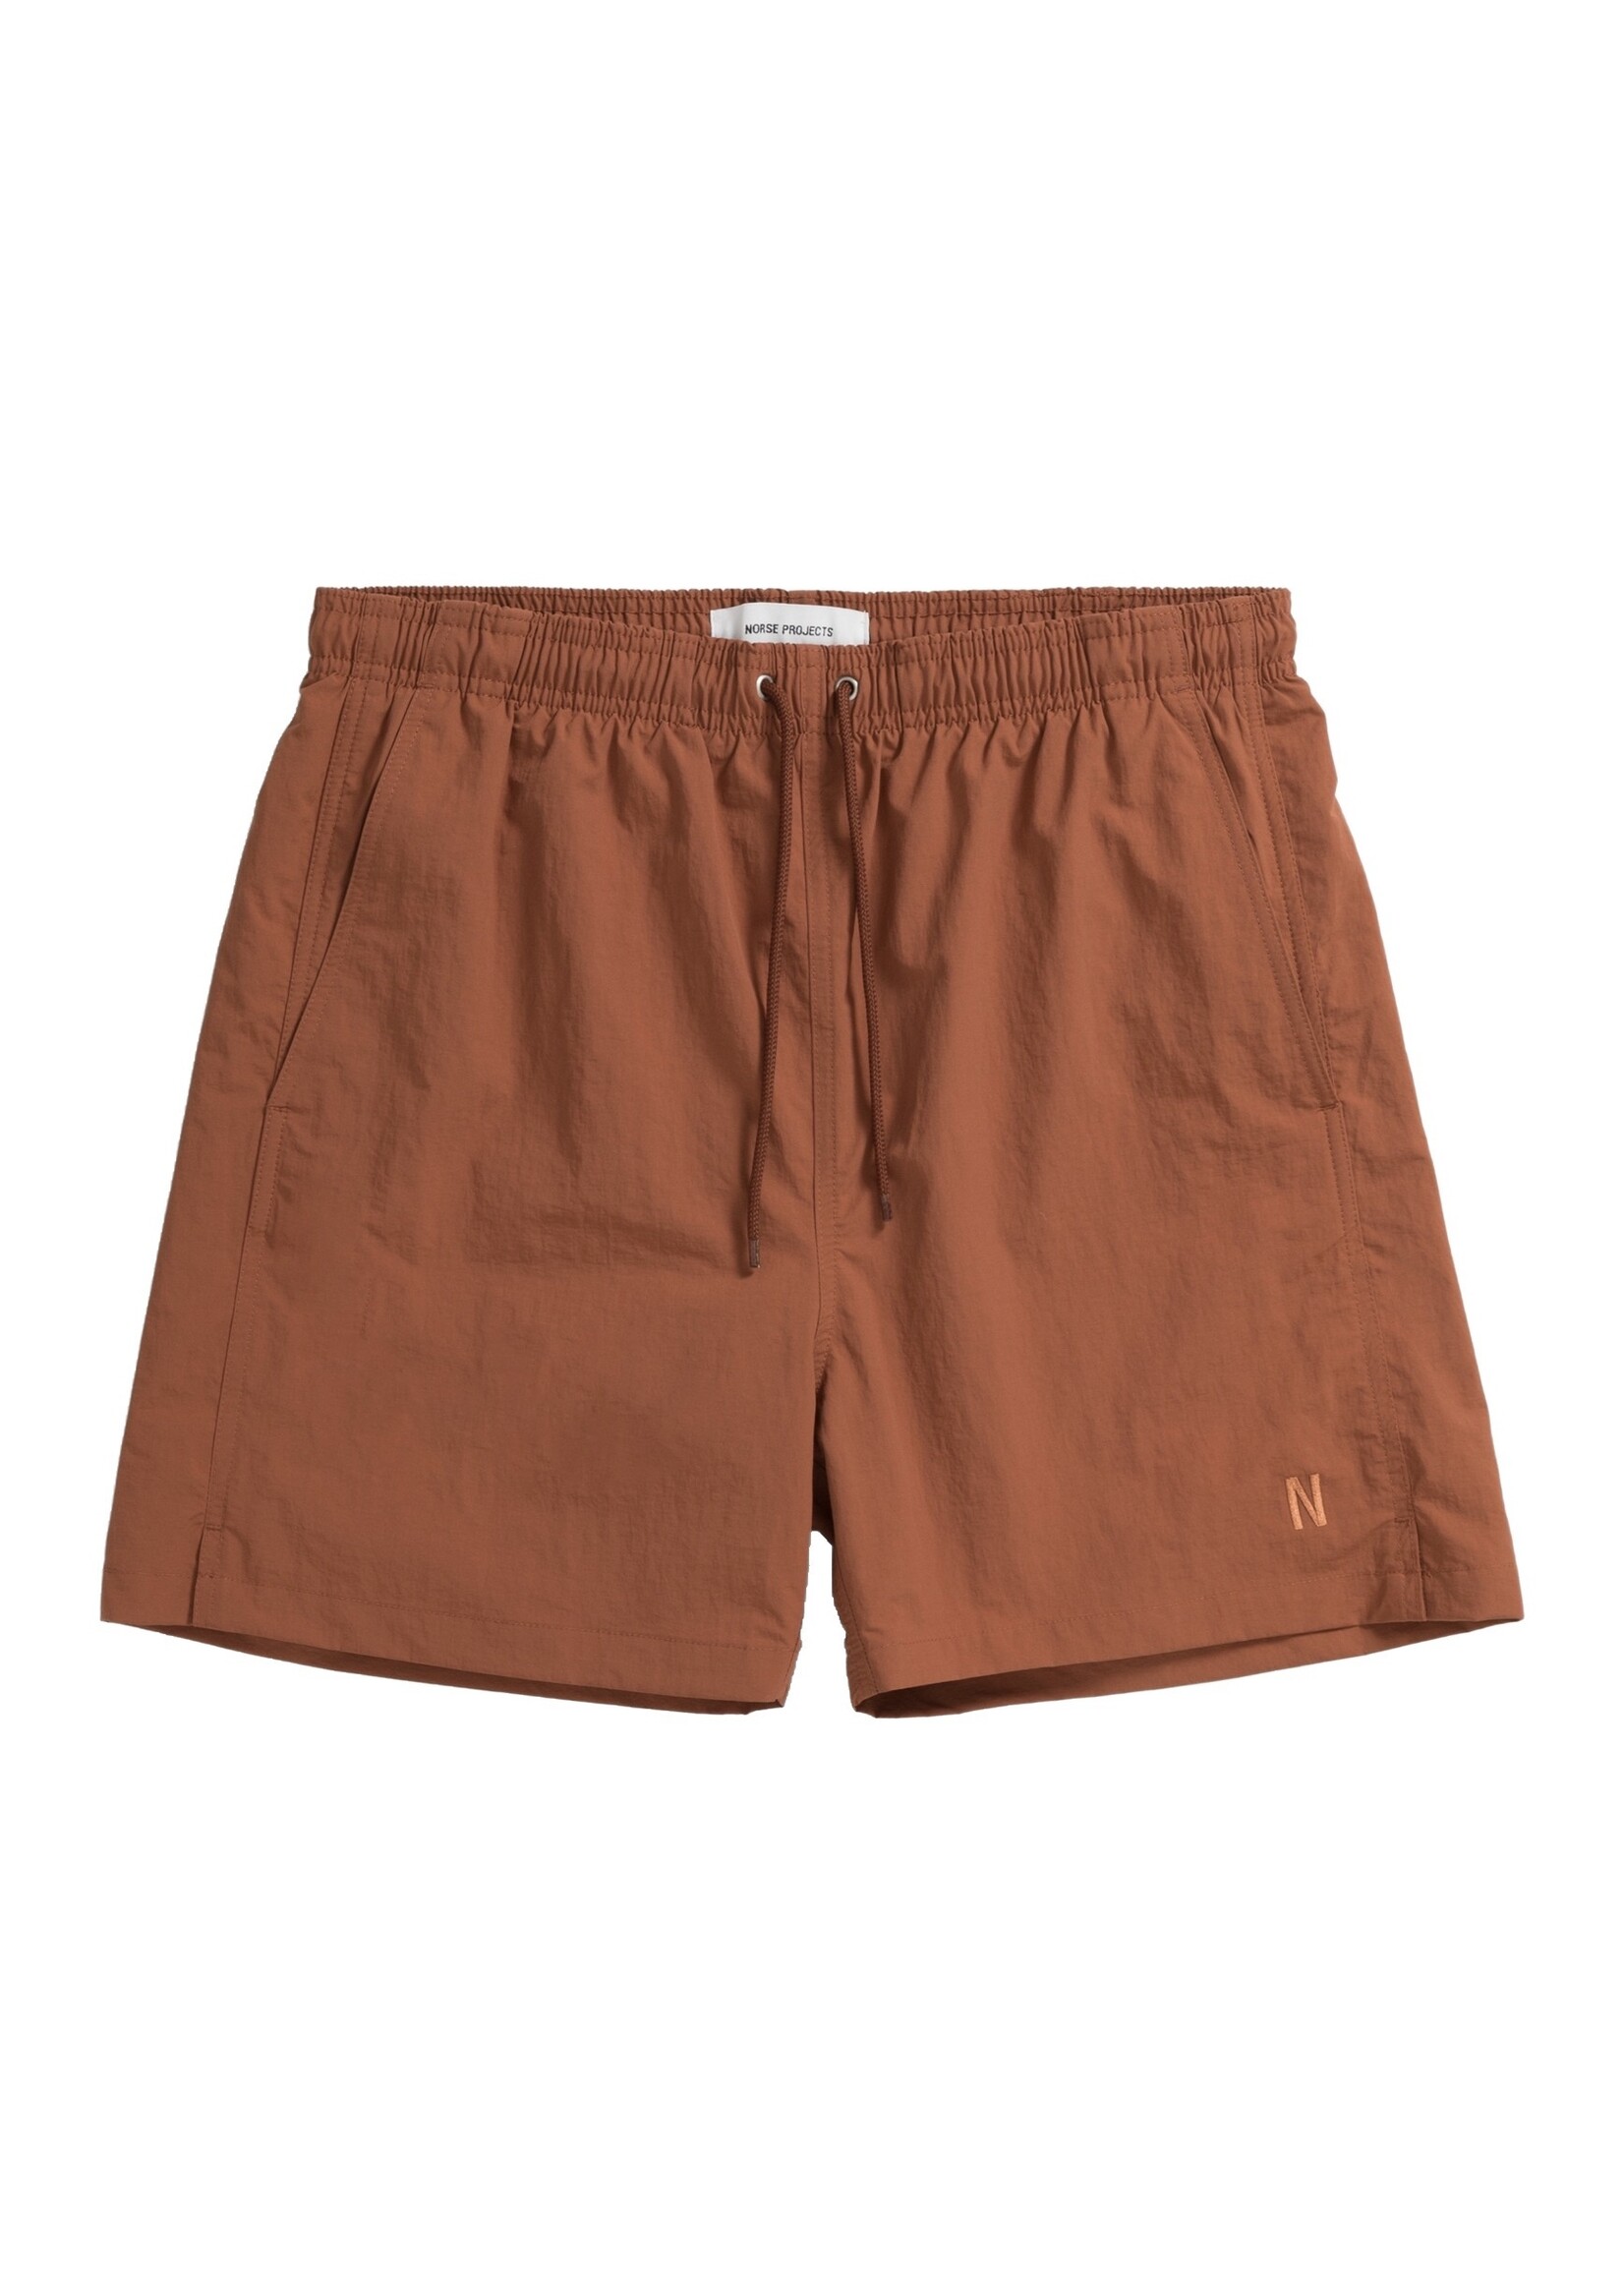 NORSE PROJECTS HAUGE RECYLED NYLON SWIMMER